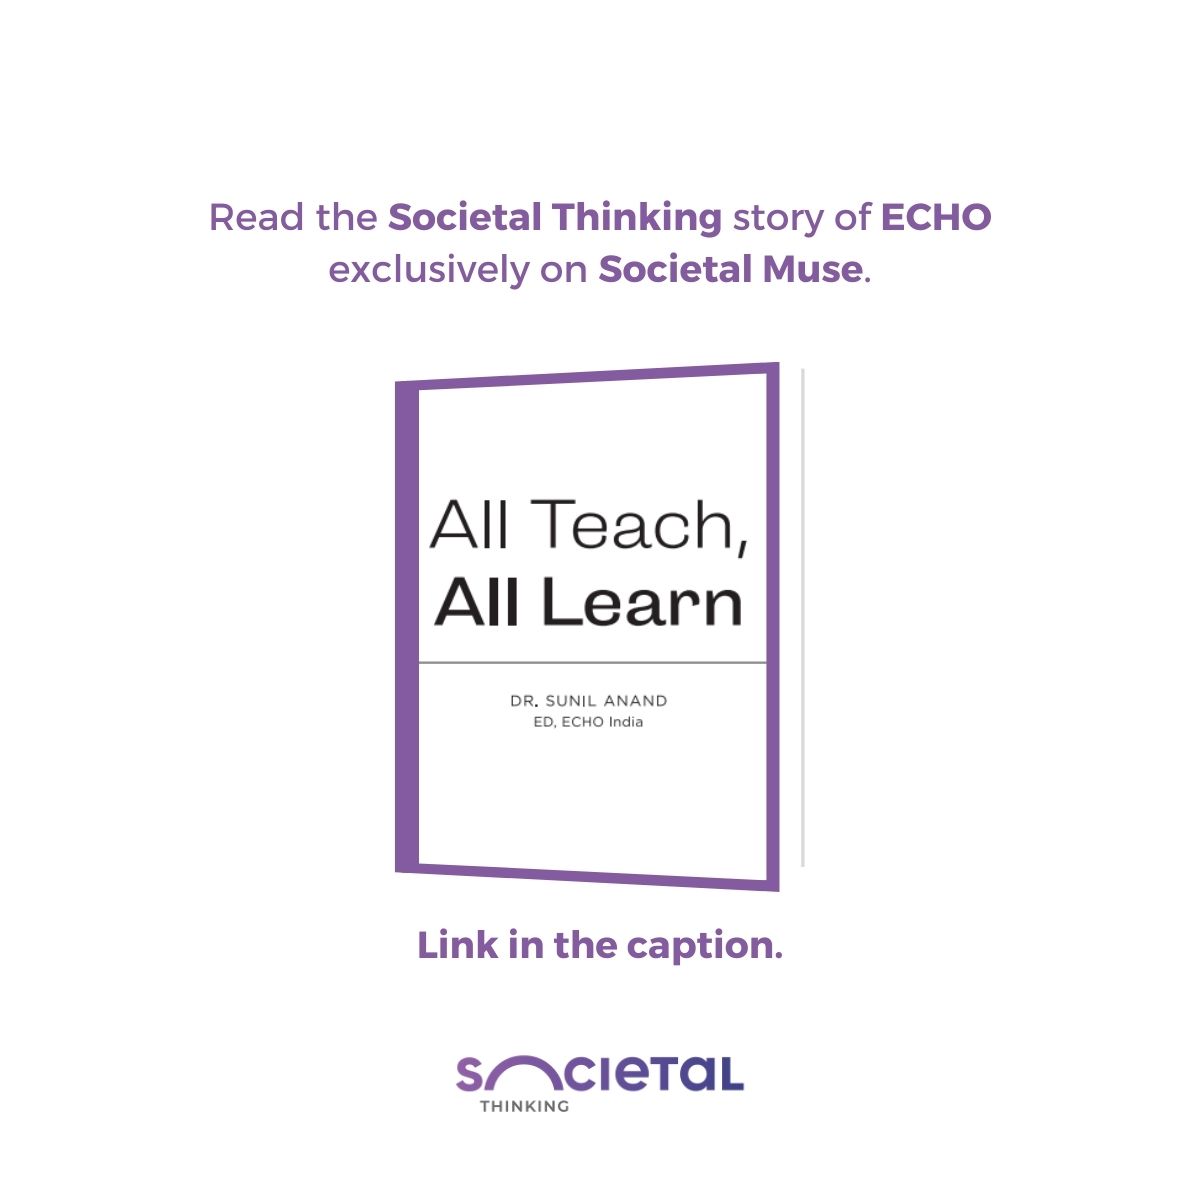 Read the Societal Thinking story of @ECHOIndiaTrust exclusively on Societal Muse here:
bit.ly/smtecho

#societalmuse #findyourmuse #societalthinking #socialimpcat #socialinnovation